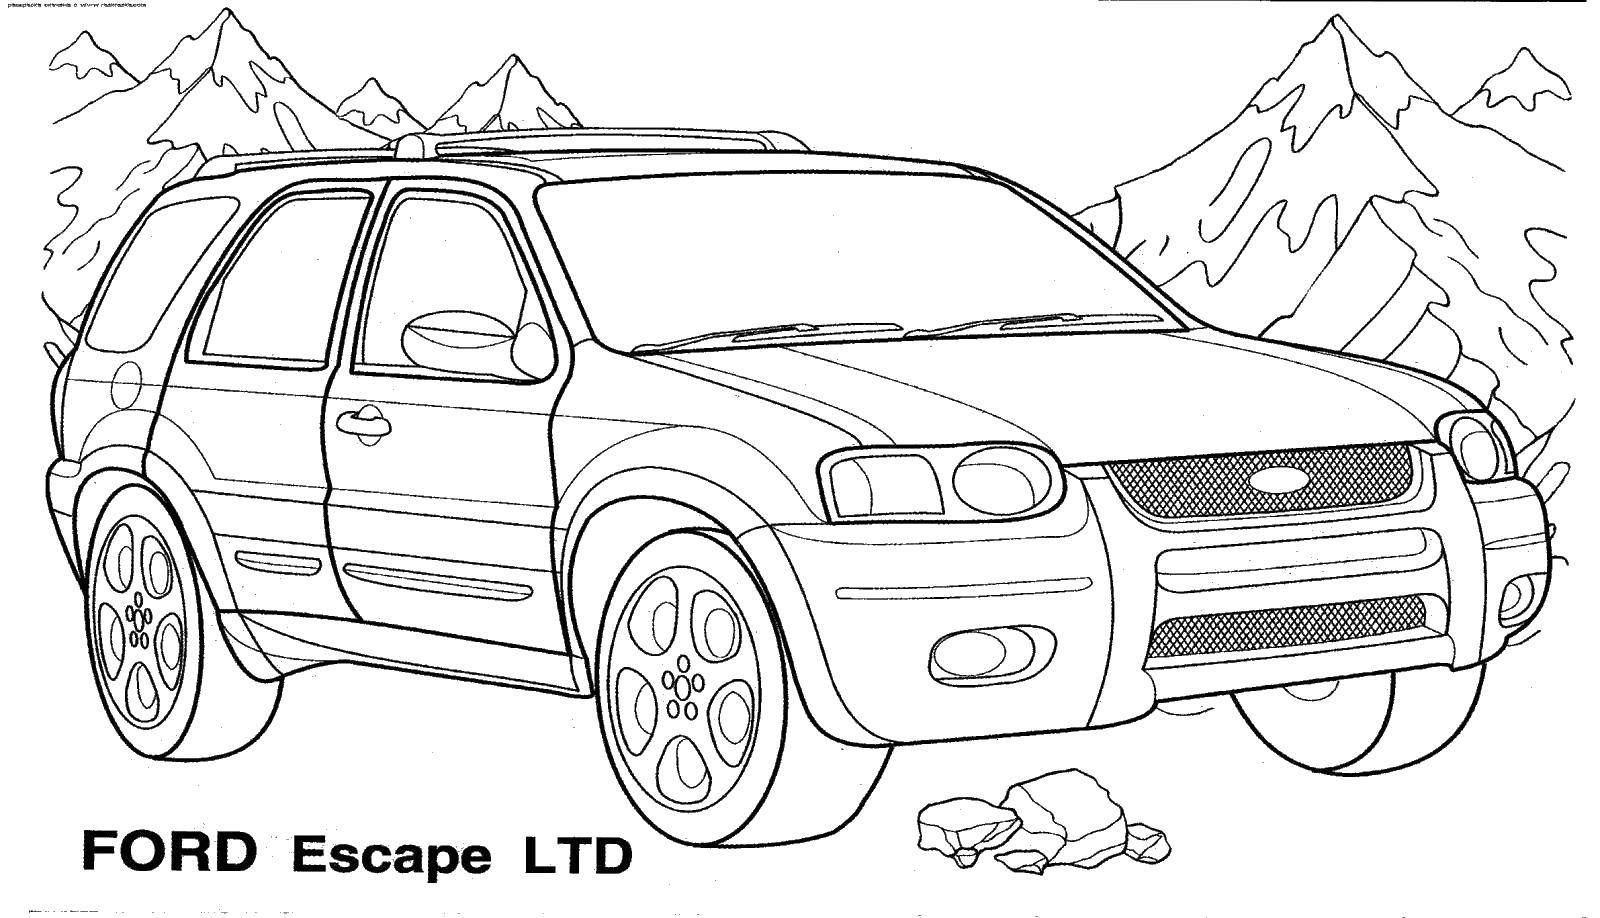 Coloring Ford escape Ltd. Category Machine . Tags:  car, transport, Ford Escape.